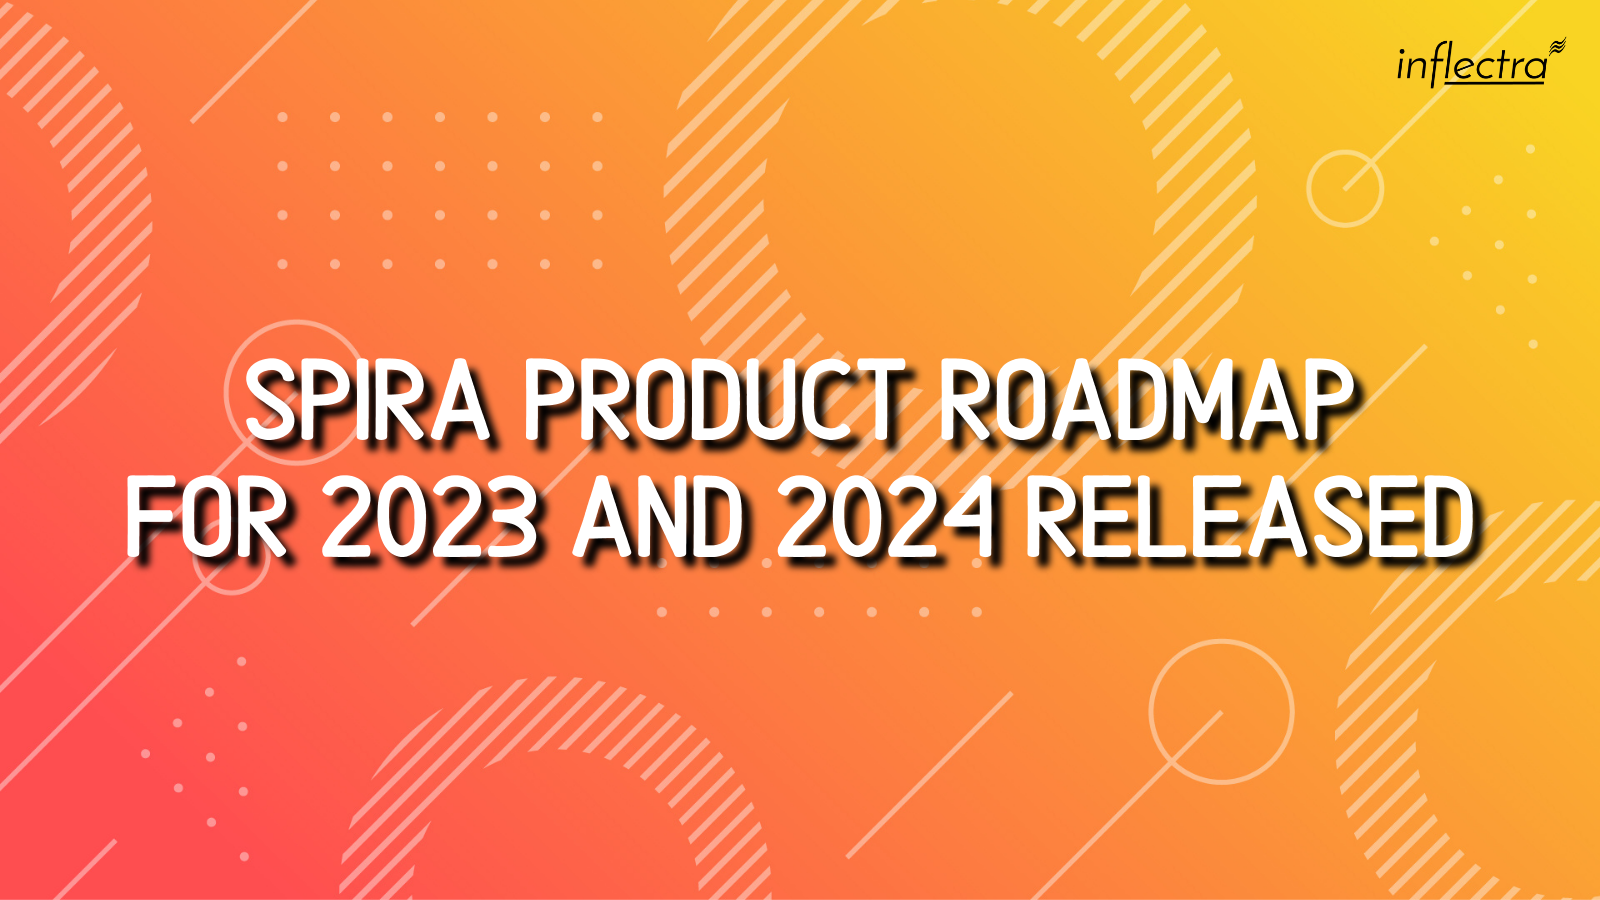 orange-background-white-text-inflectra-spira-product-roadmap-released-image